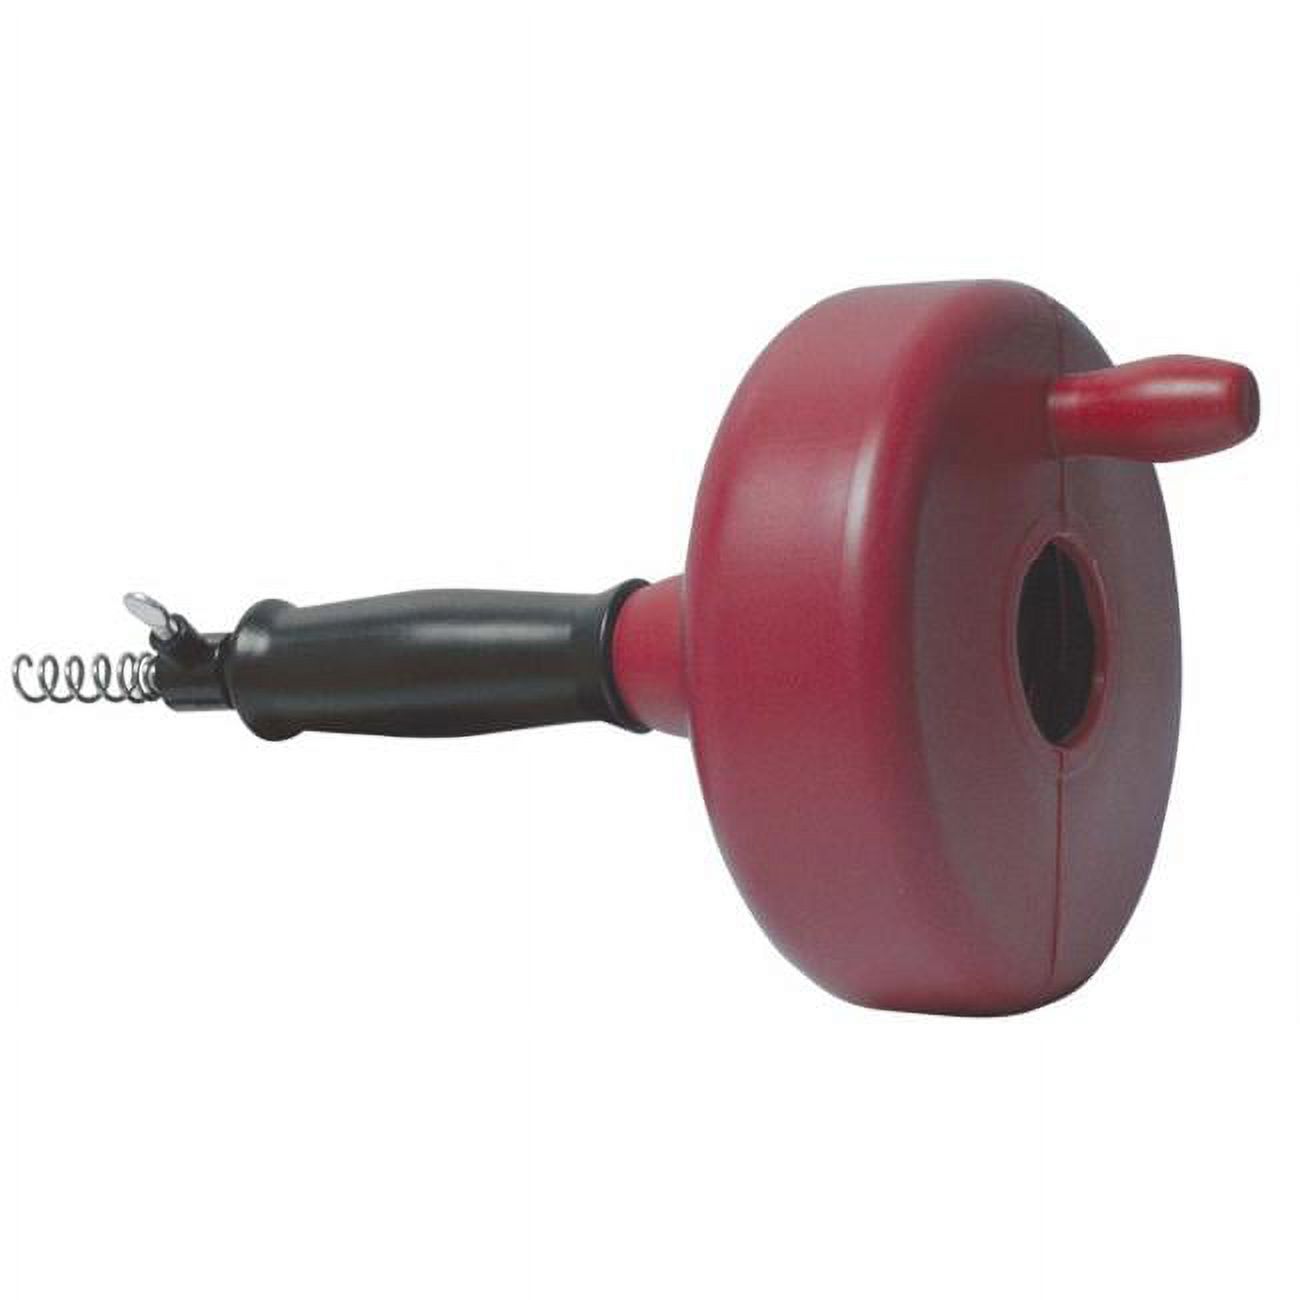 Waxman Consumer Products Group Titan Drain Auger - image 1 of 1